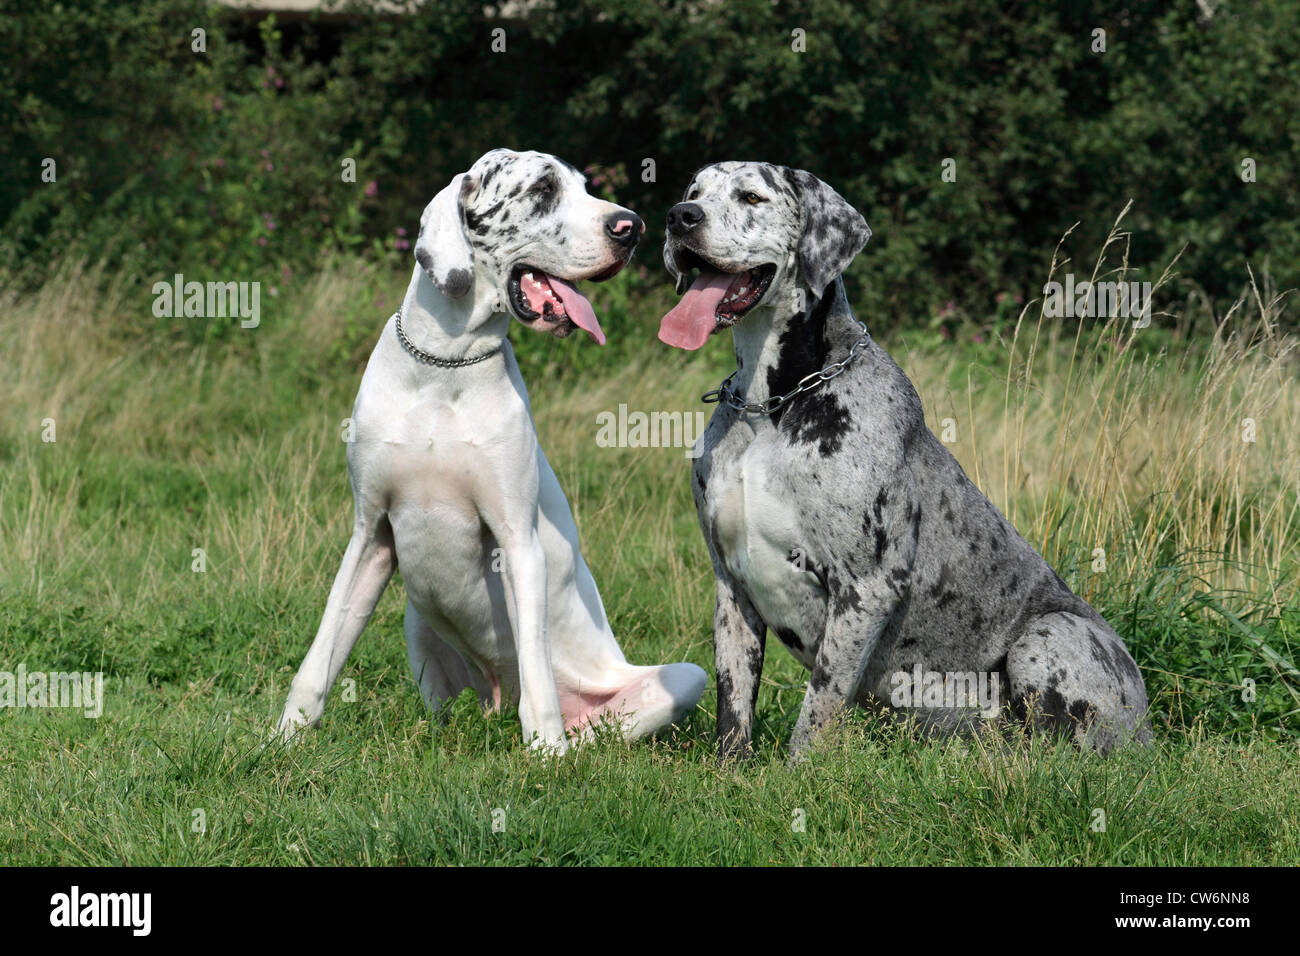 Great Dane (Canis lupus f. familiaris), two Great Danes sitting next to each other on a meadow. Tiger Dane and White Dane Stock Photo